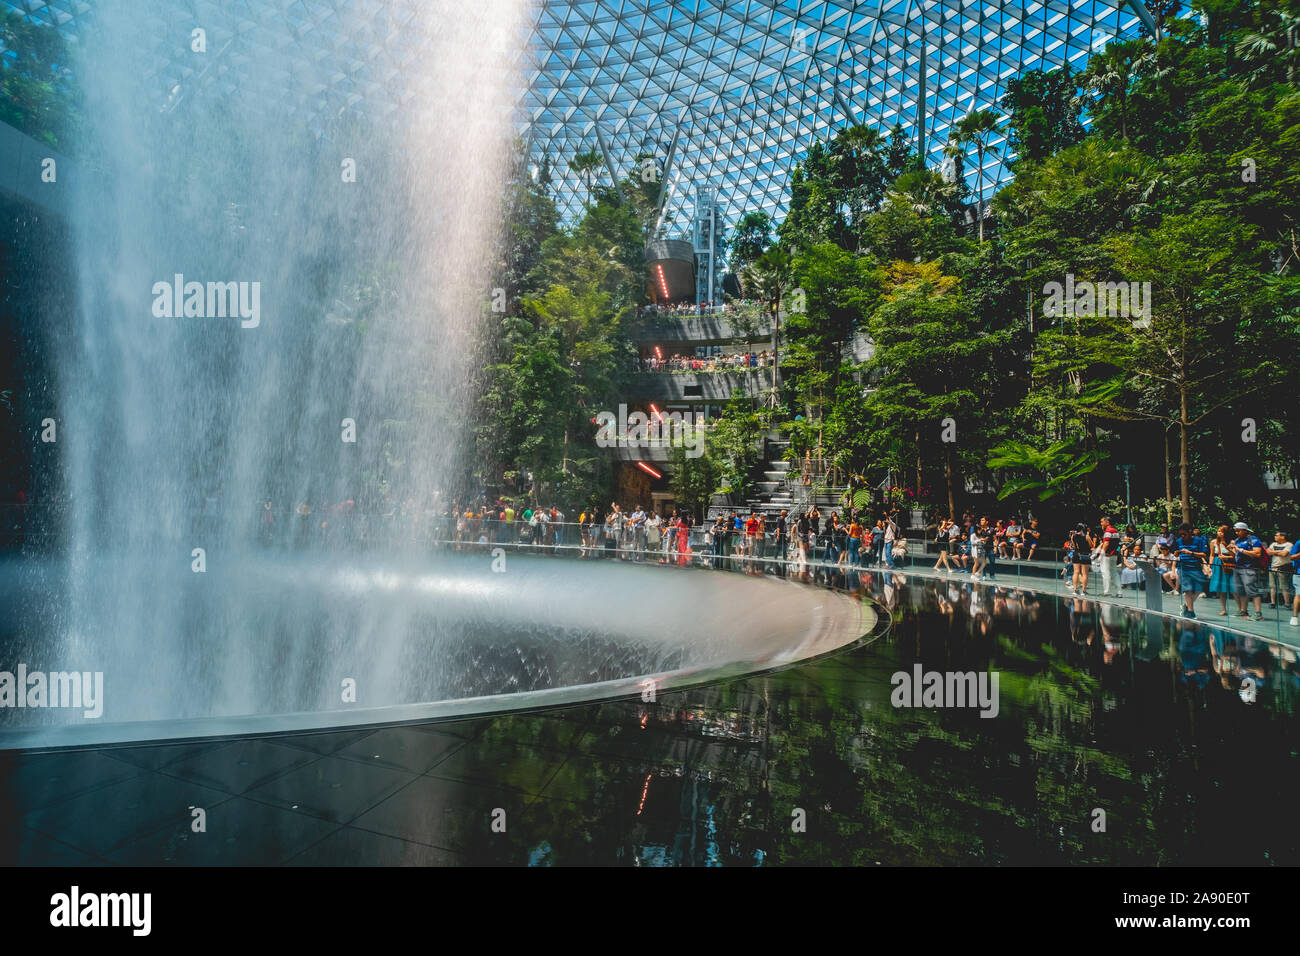 Massive flow of waters from the Rain Vortex cascades into this huge round basin that holds up to over 30,000 litres of water at Jewel Changi Airport. Stock Photo